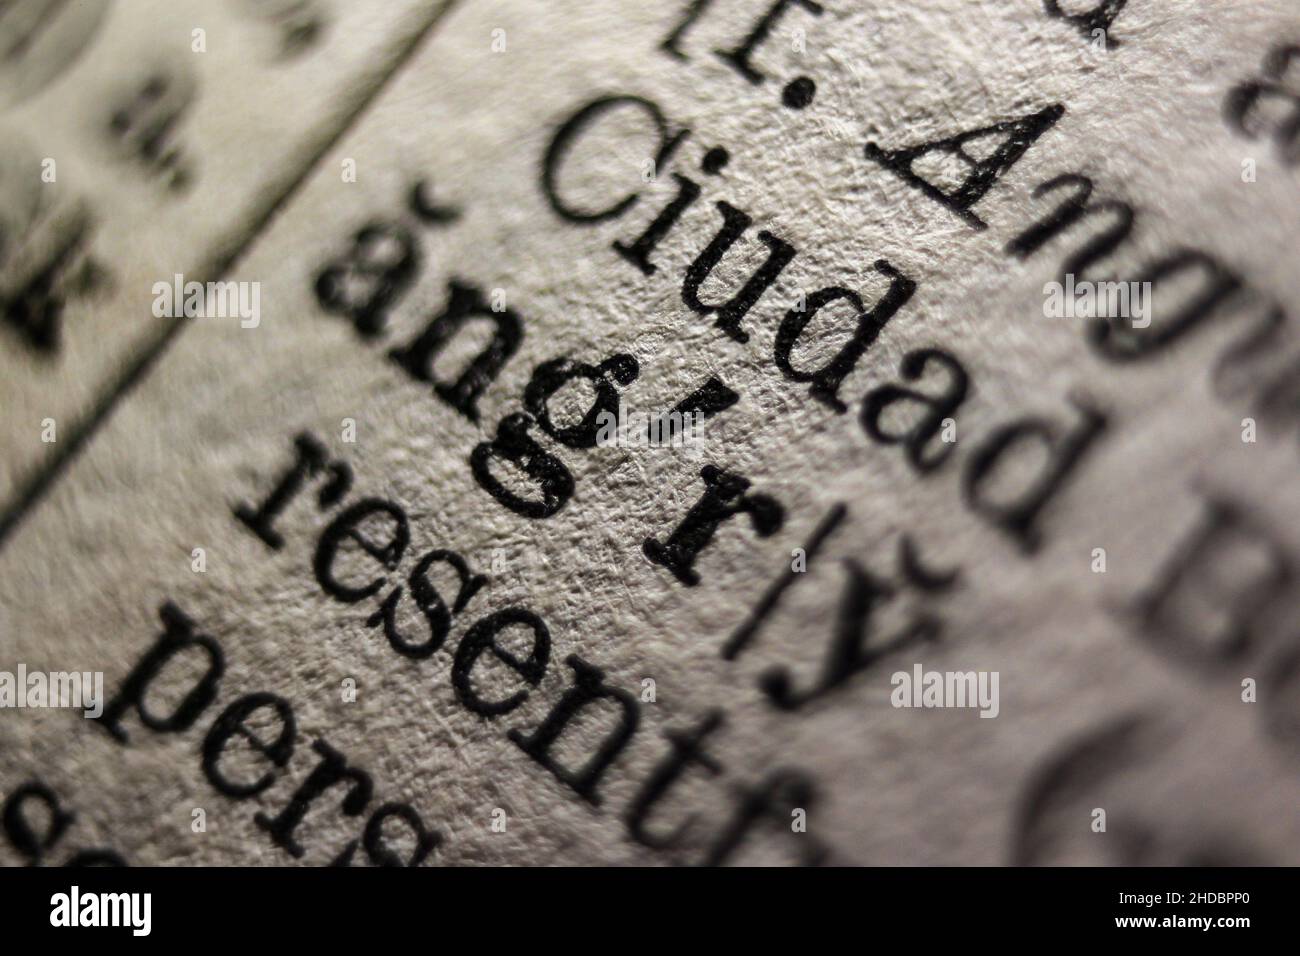 Word 'angry' printed on dictionary page, macro close-up Stock Photo